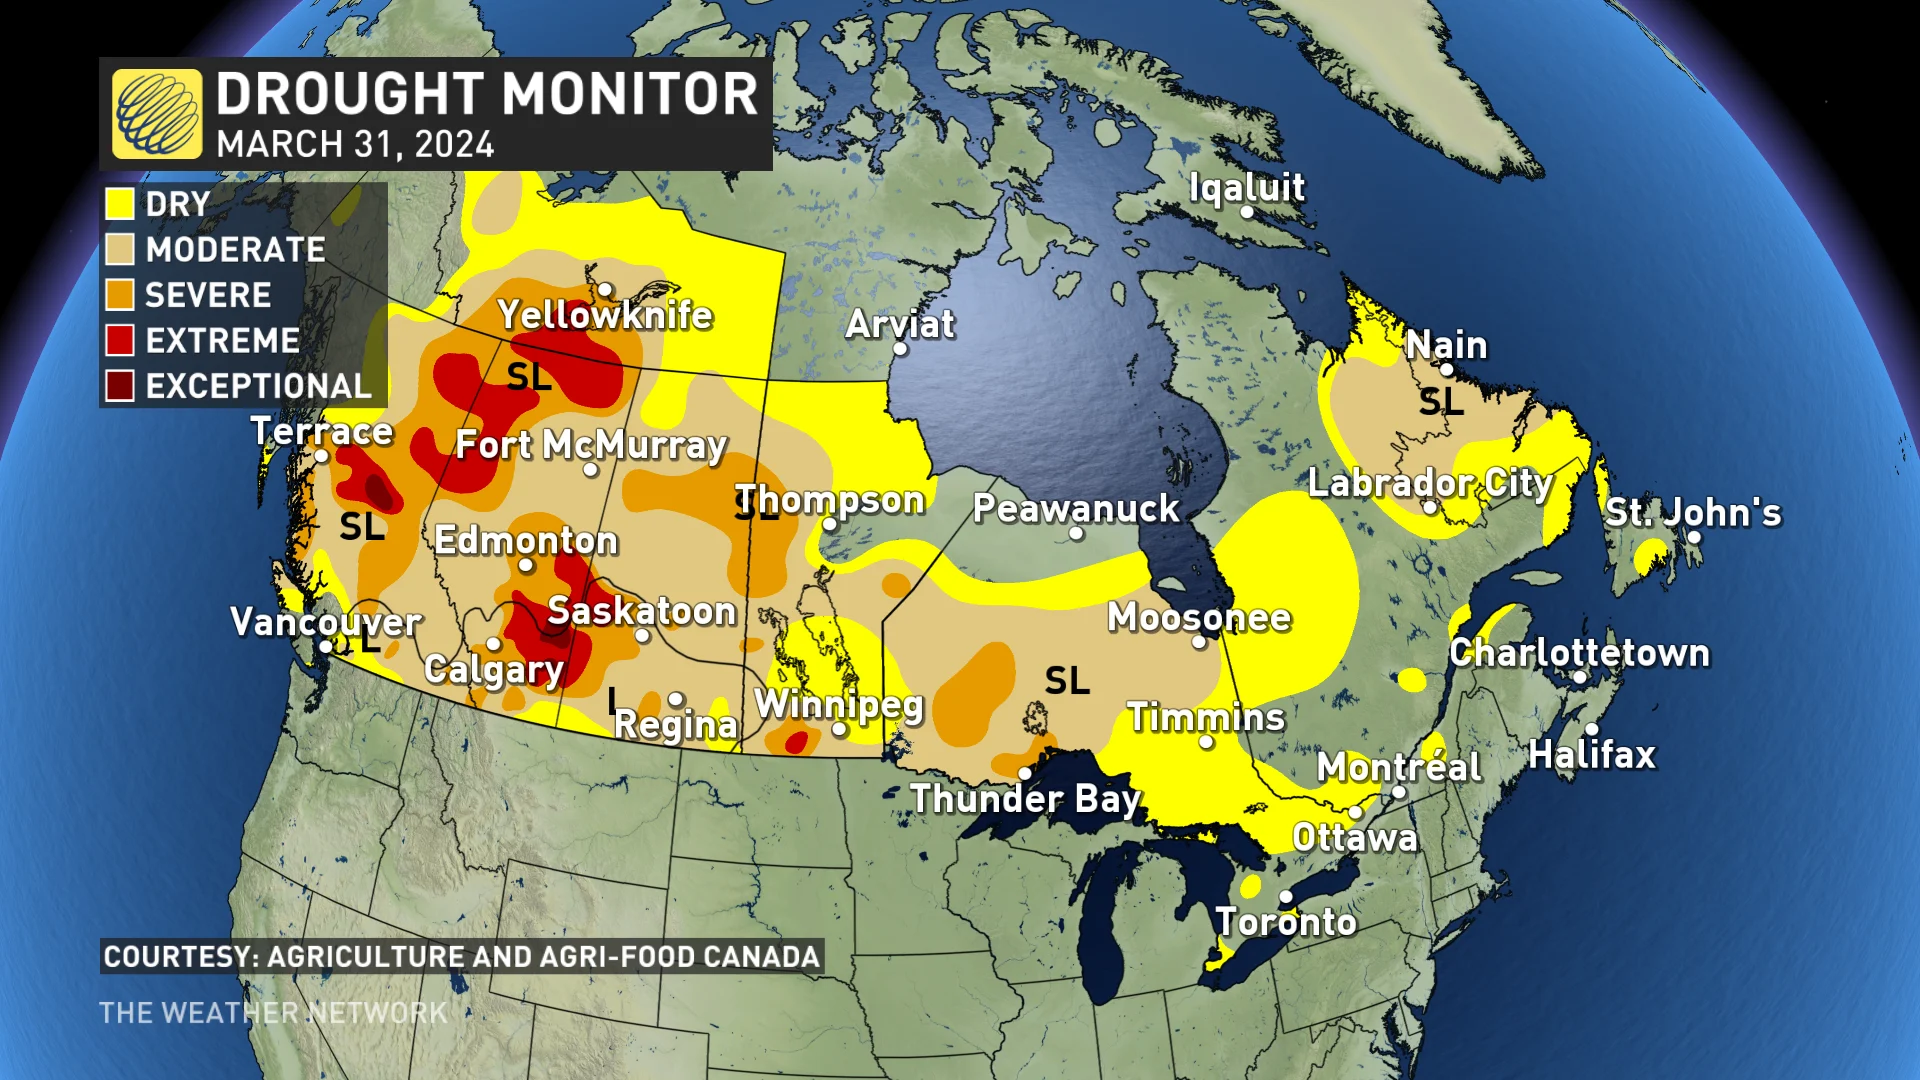 March 31, 2024: Canada's Drought Monitor